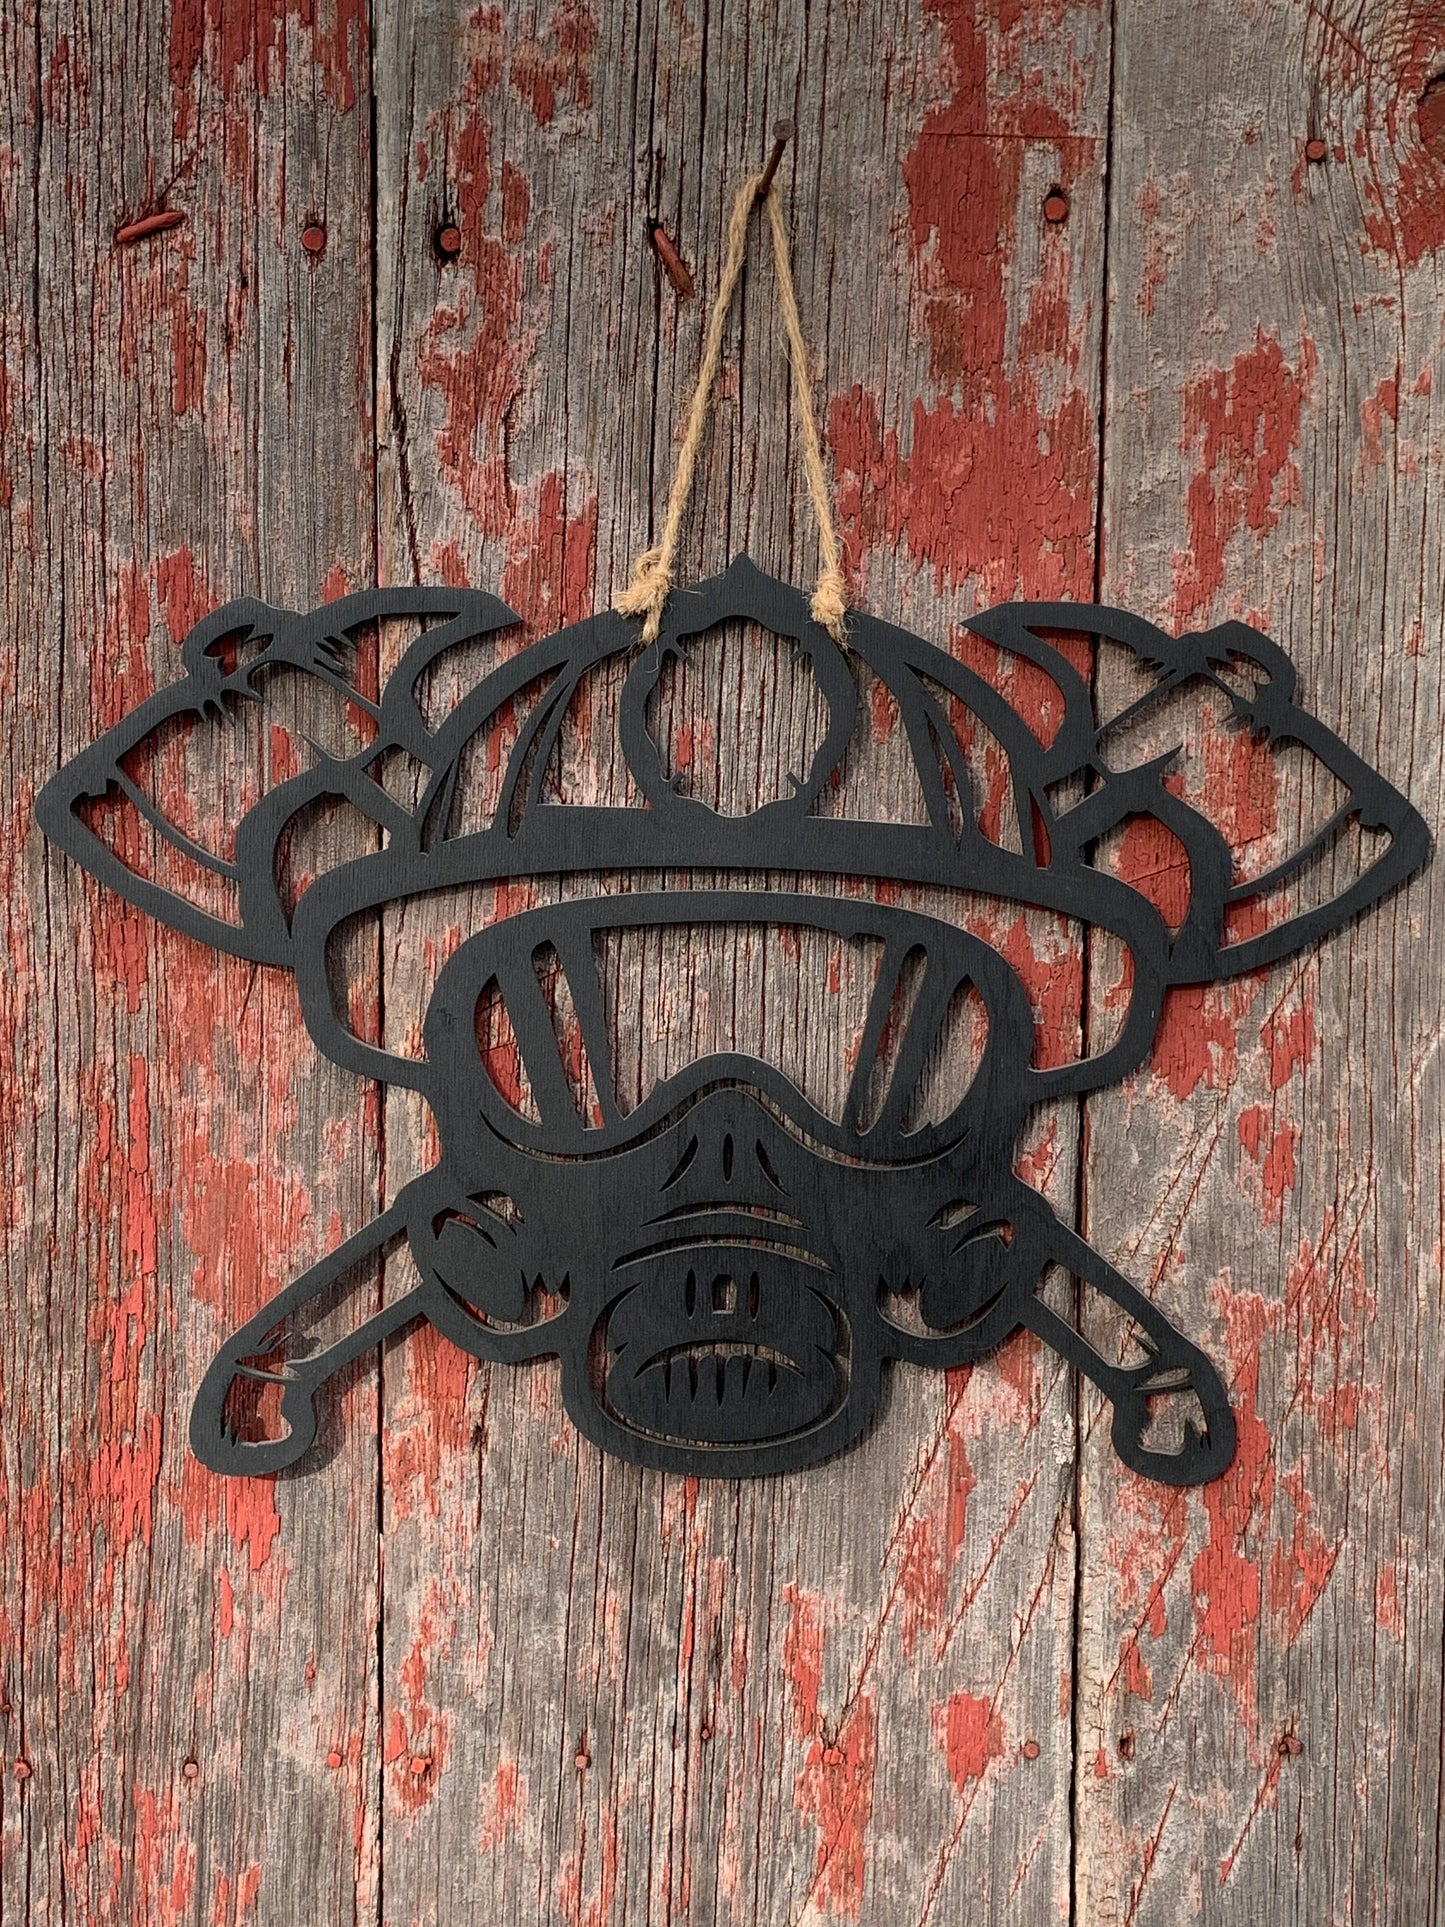 Firefighter Mask with Axe